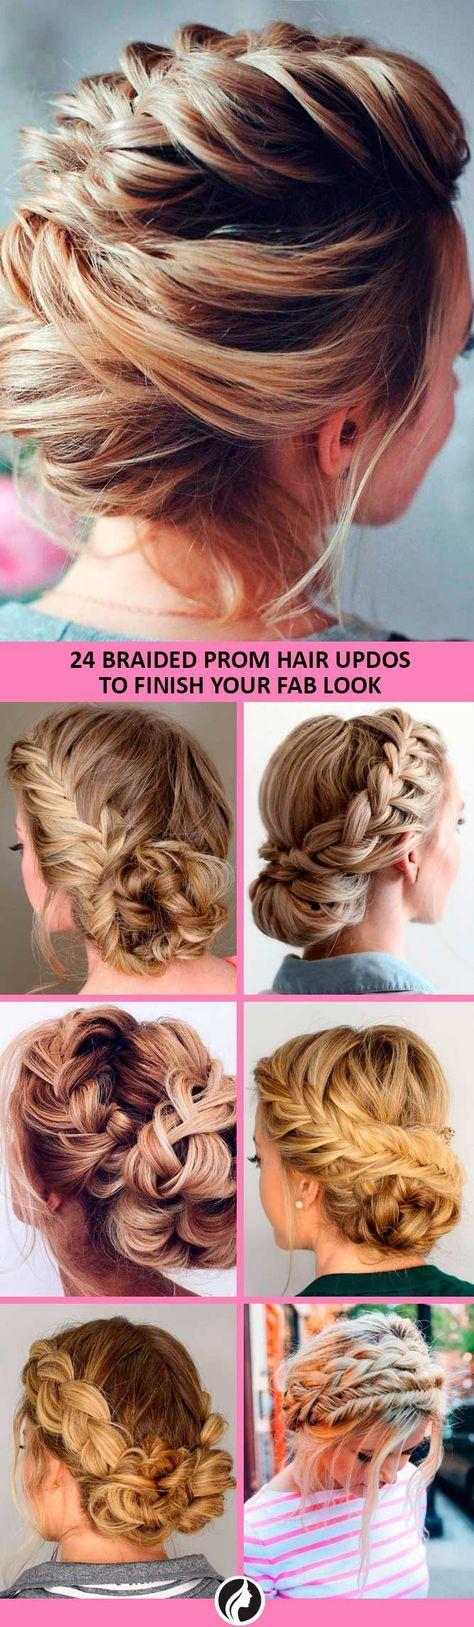 Hochzeit - 30 Braided Prom Hair Updos To Finish Your Fab Look